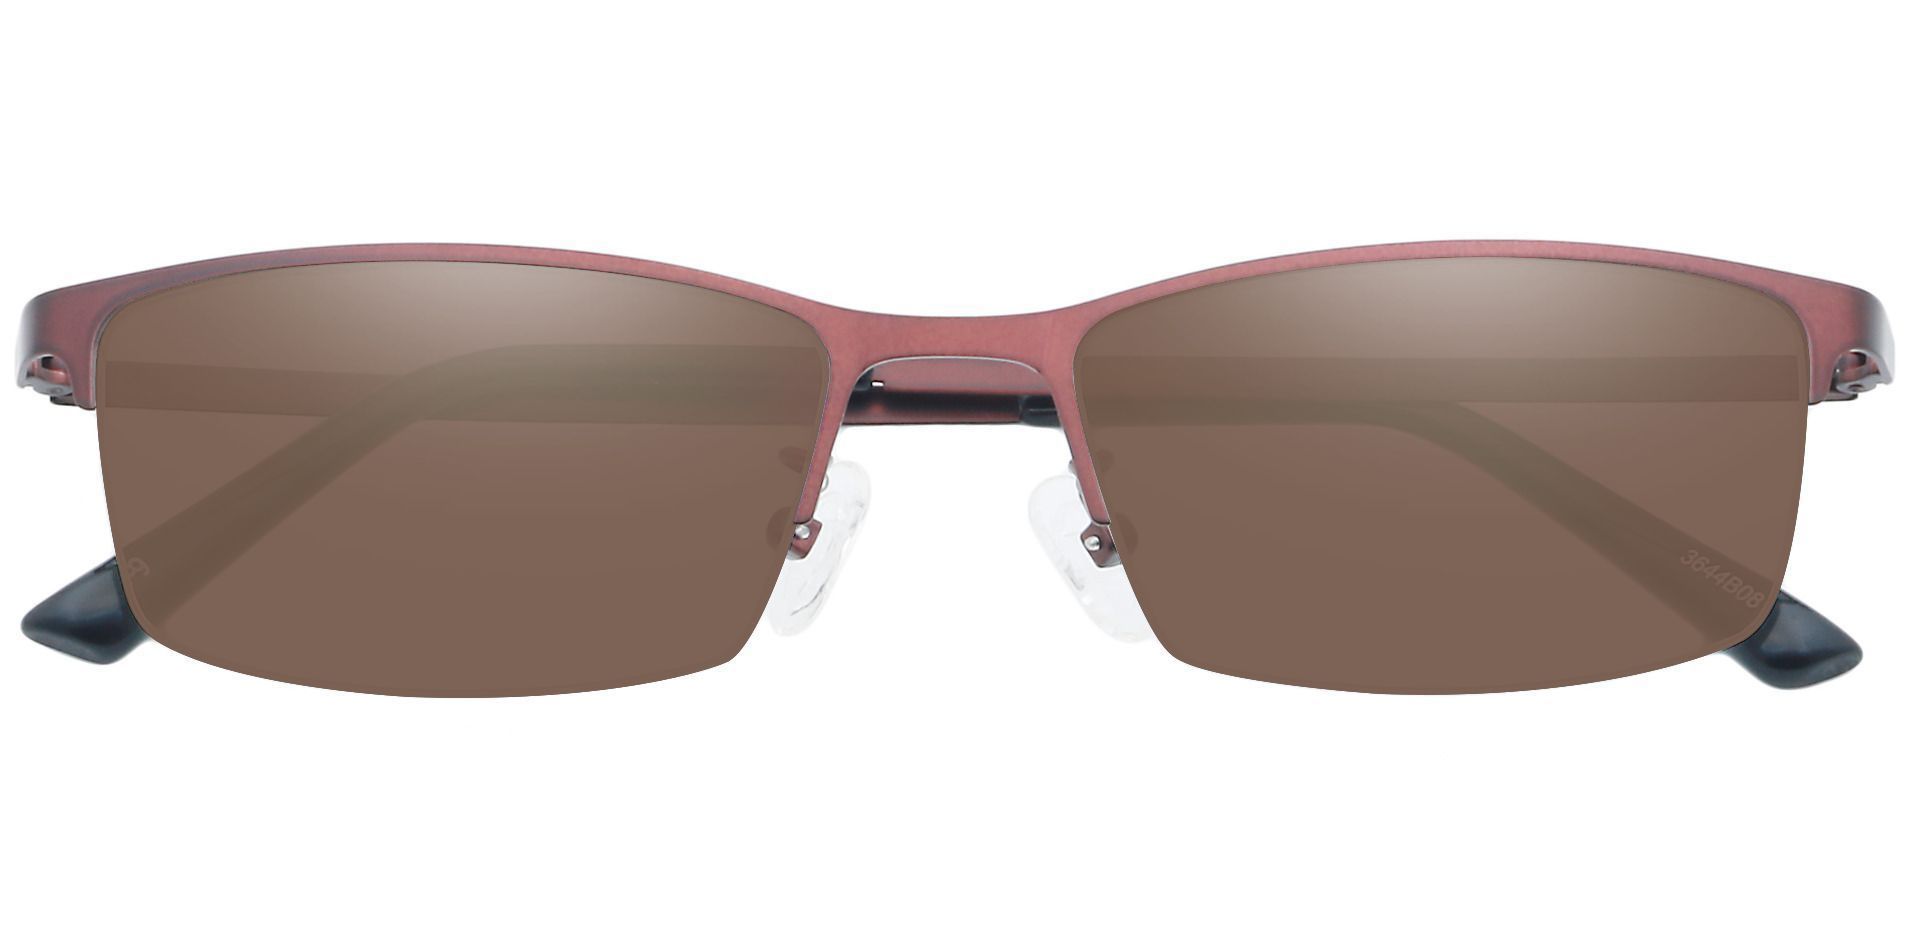 Parsley Rectangle Non-Rx Sunglasses -  Brown Frame With Brown Lenses